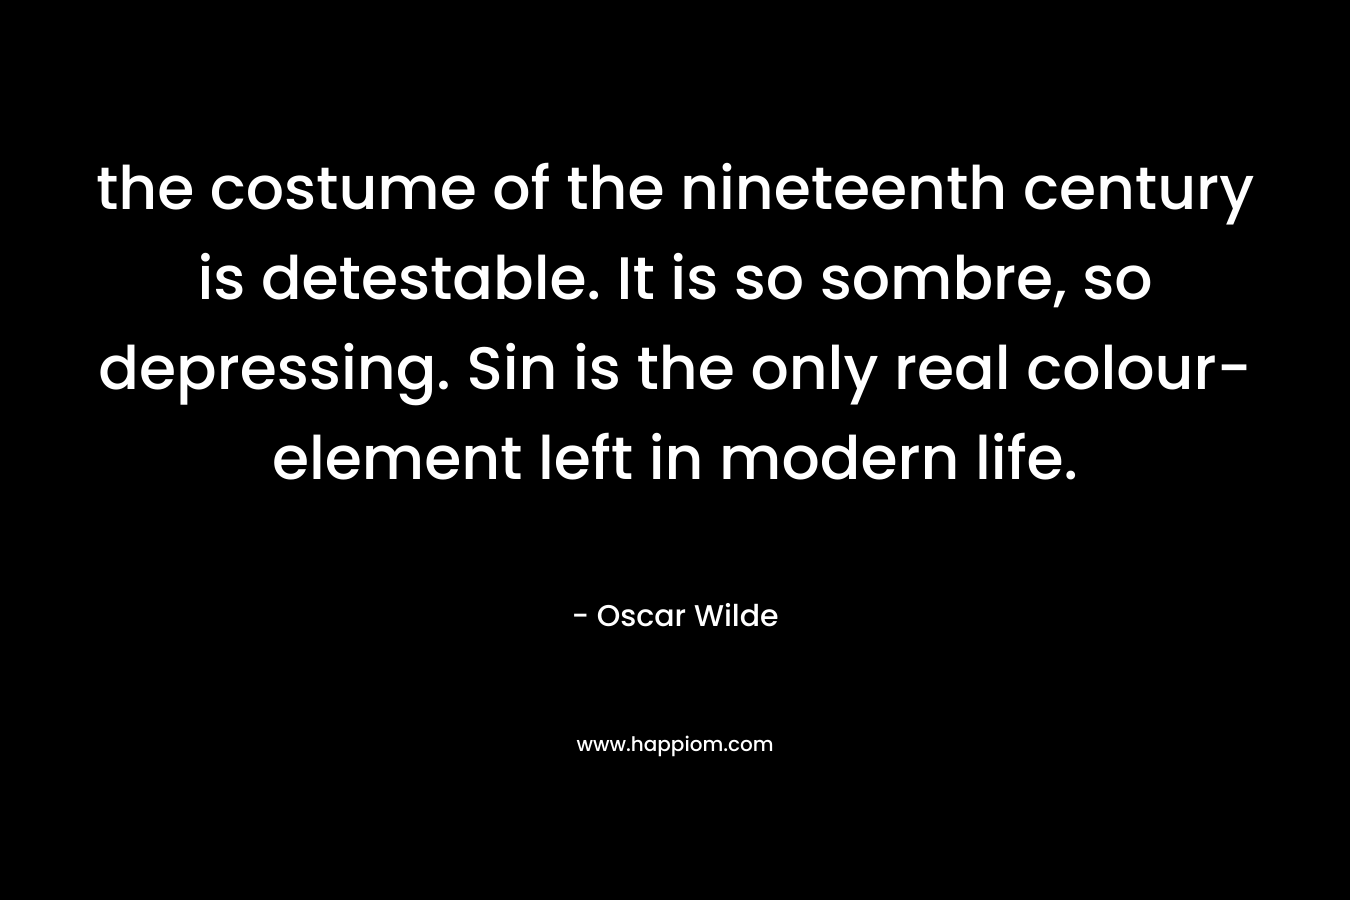 the costume of the nineteenth century is detestable. It is so sombre, so depressing. Sin is the only real colour-element left in modern life. – Oscar Wilde